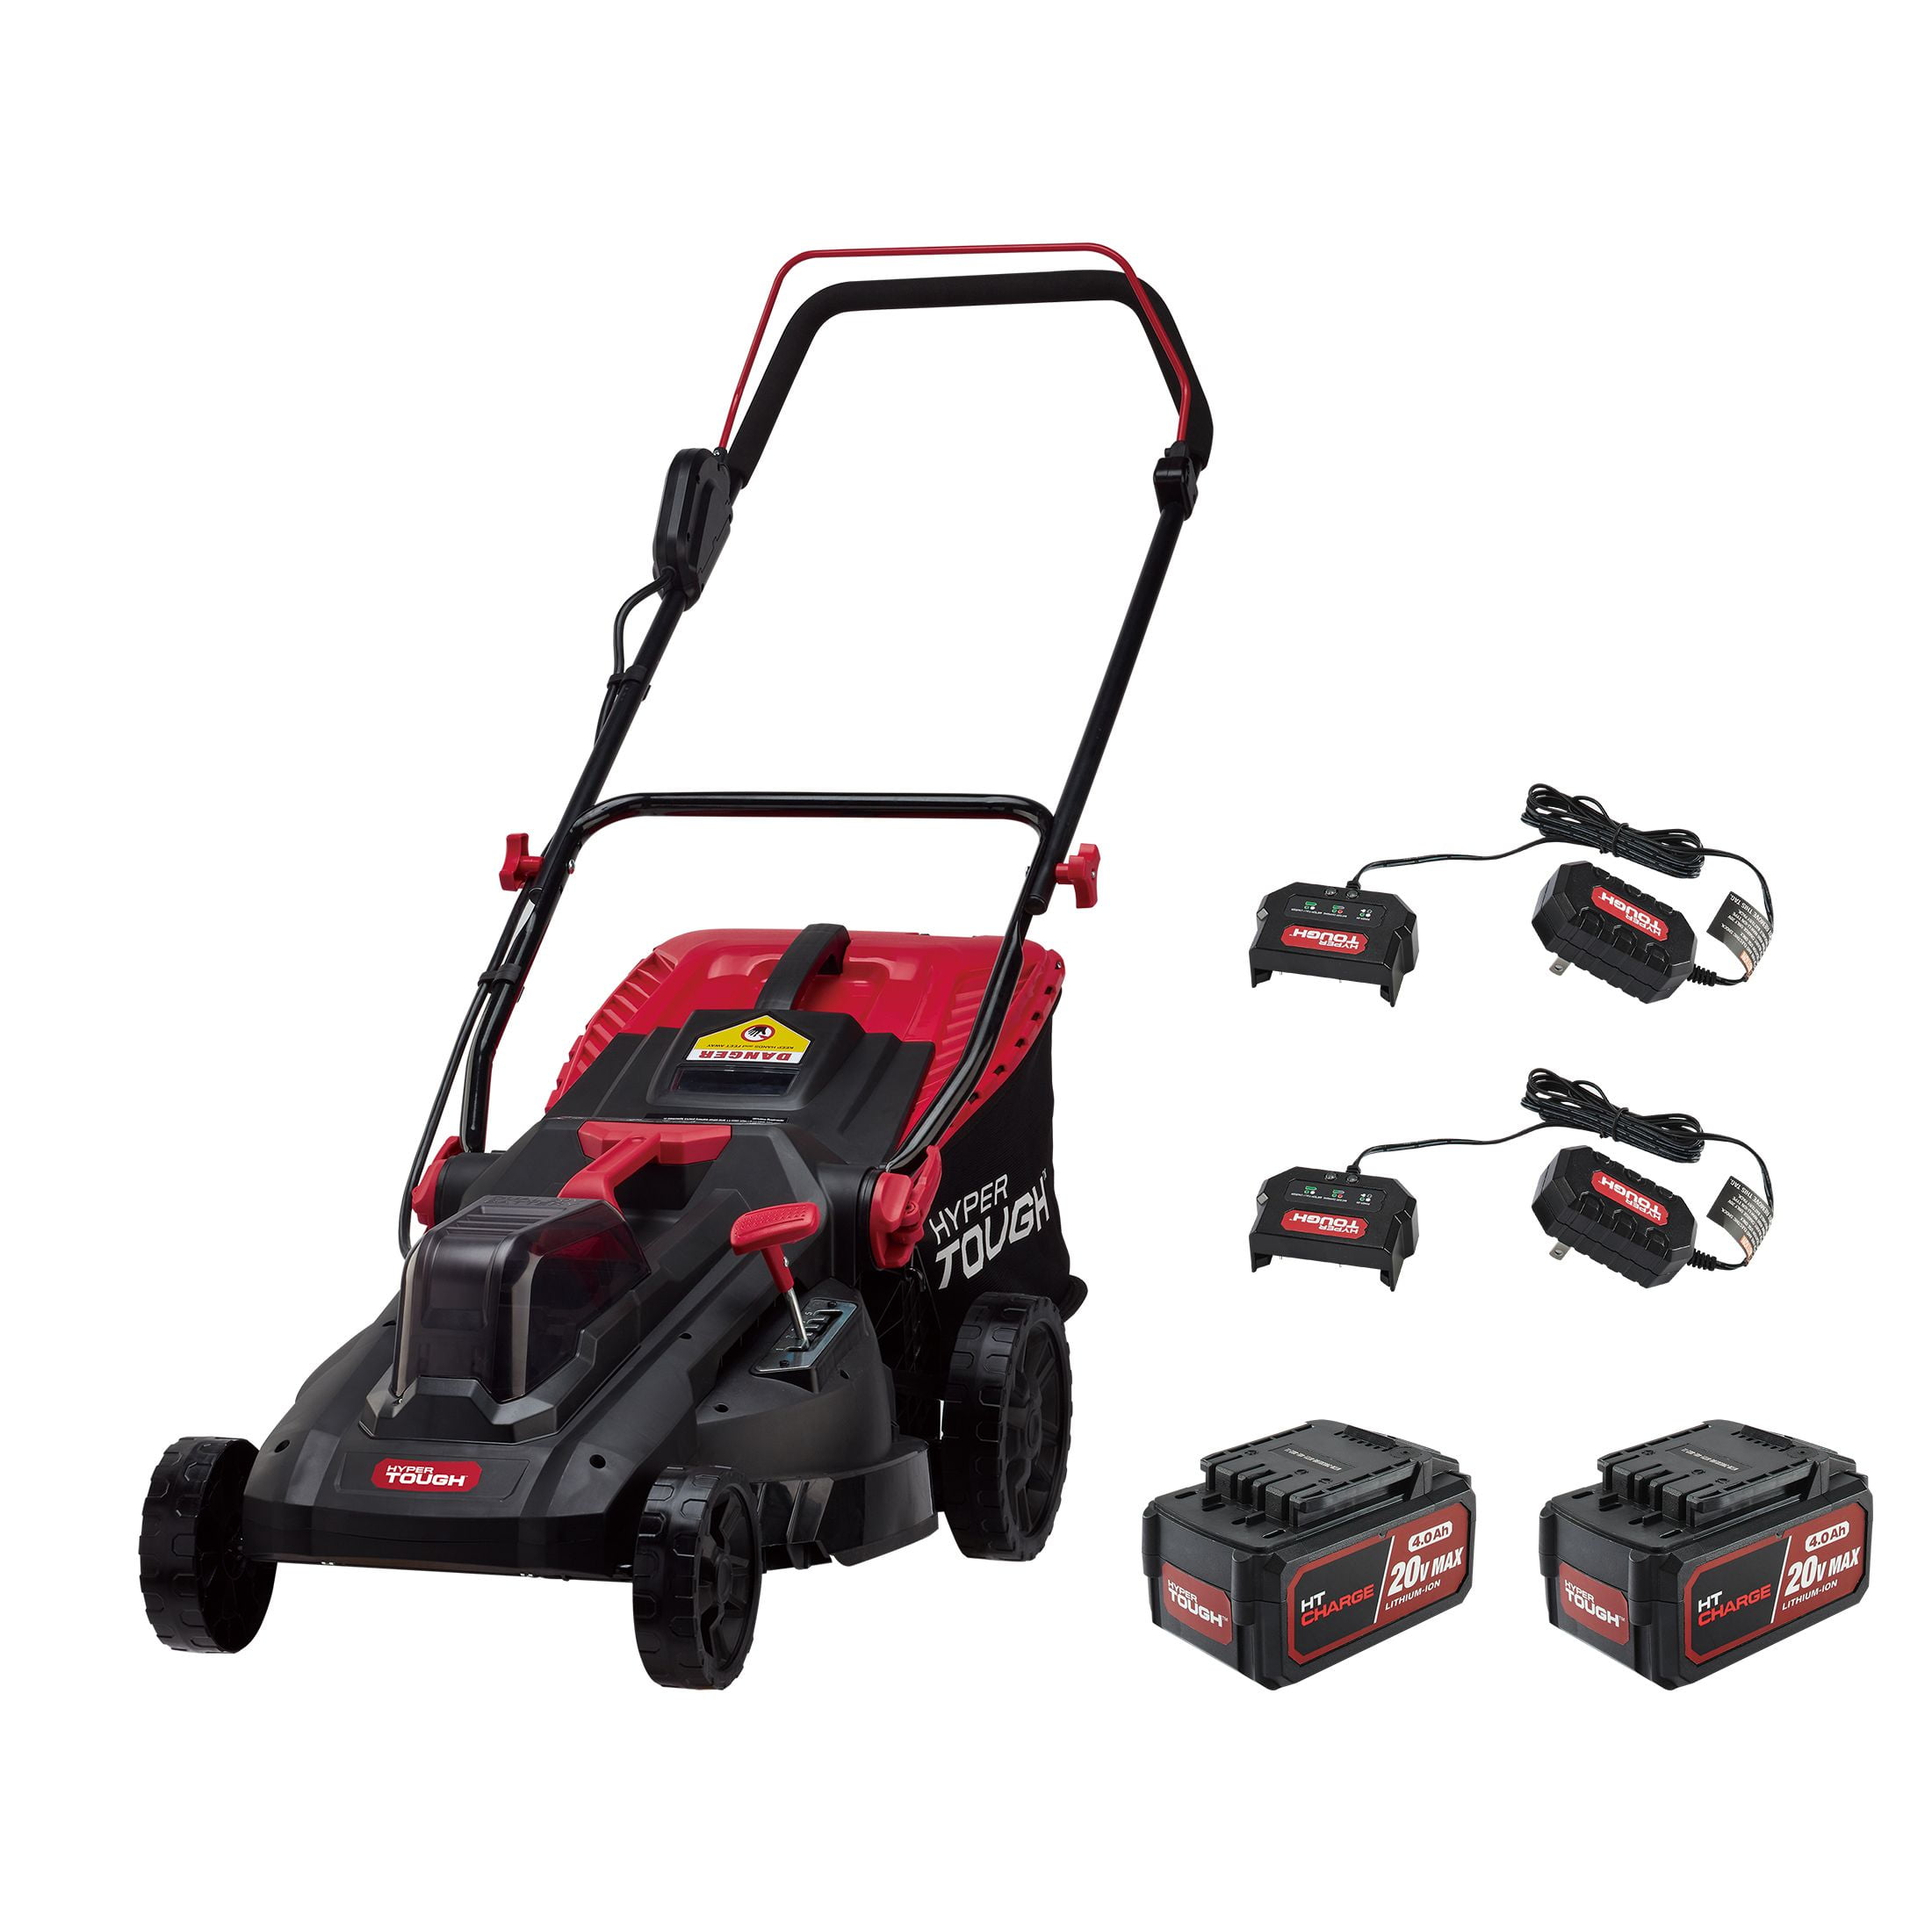 Henx 16 in. 40V Cordless Electric Brushless Hand Push Lawn Mower, Charger  and Battery Included, Multicolor at Tractor Supply Co.